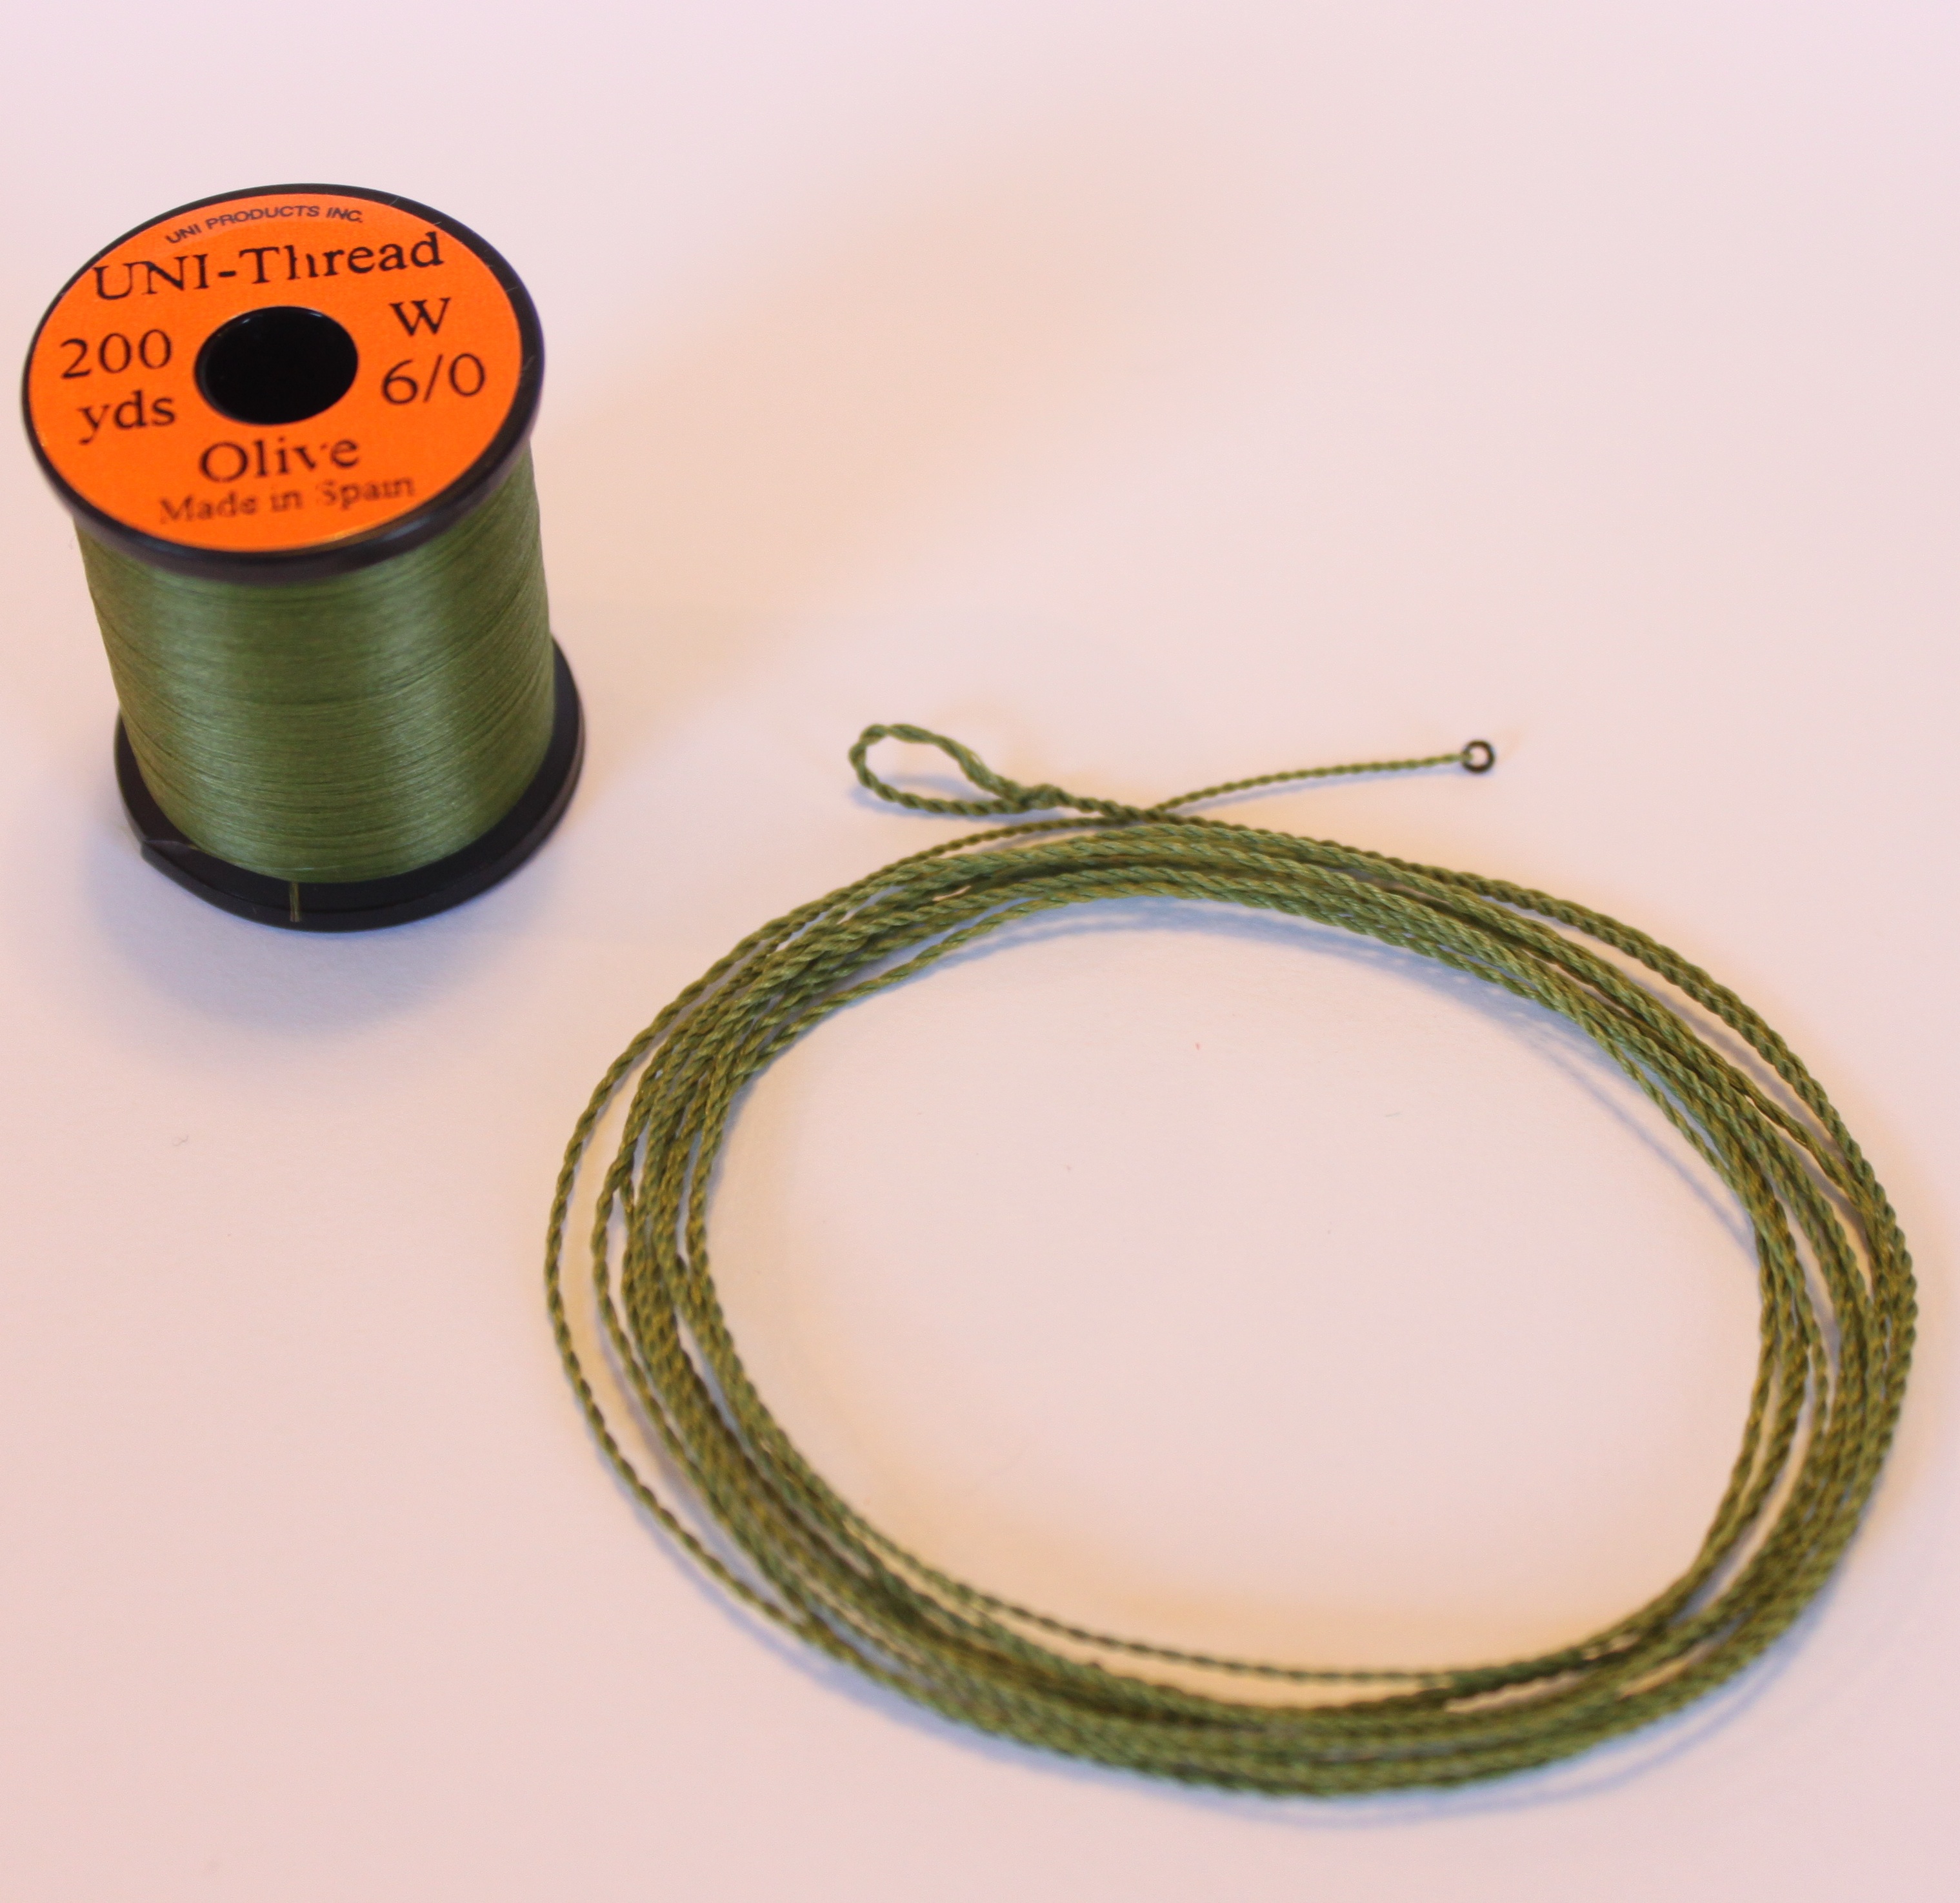 Furled Leader Size Chart  Fly fishing tips, Fly fishing, Fly